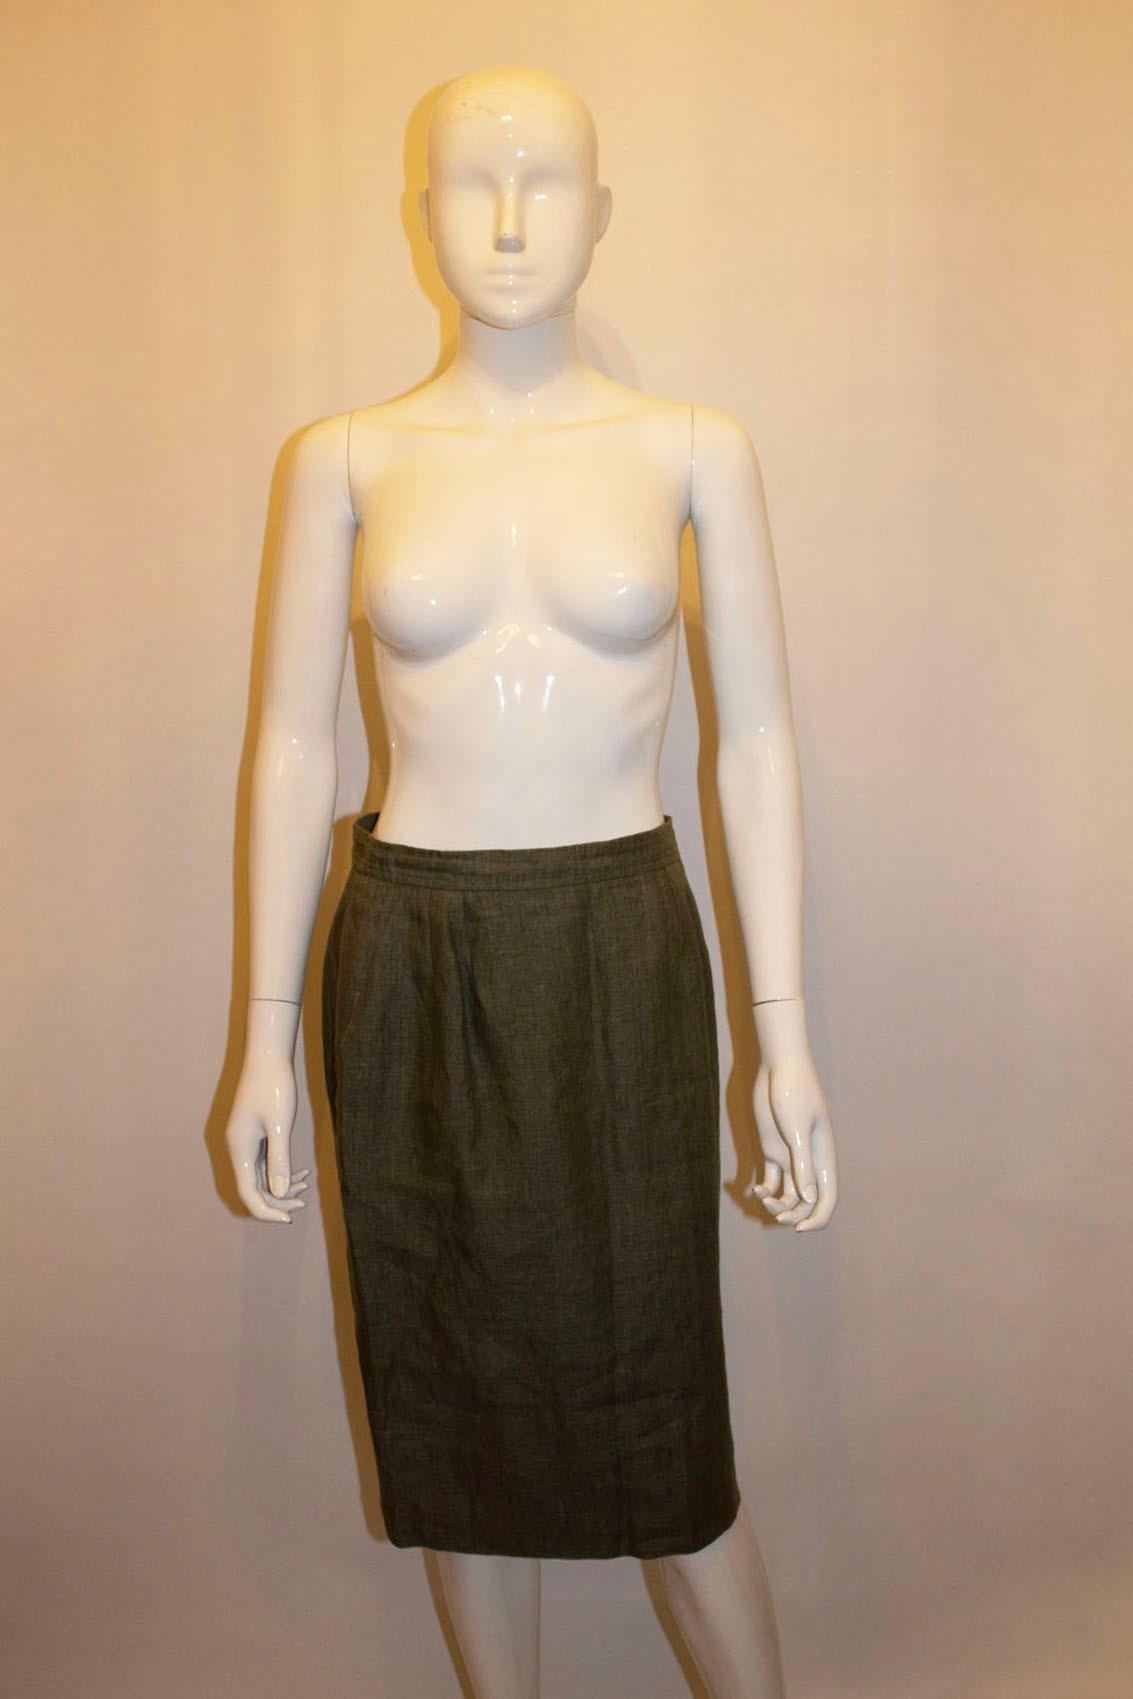 Perfect for Spring  or Summer, this pretty vintage skirt by Yves Saint Laurent ,Rive Gauche line. The linen skirt is in a sage green colour and has a side zip and two front pockets. The skirt is fully lined.
Size 40 measurements: waist 28'', length